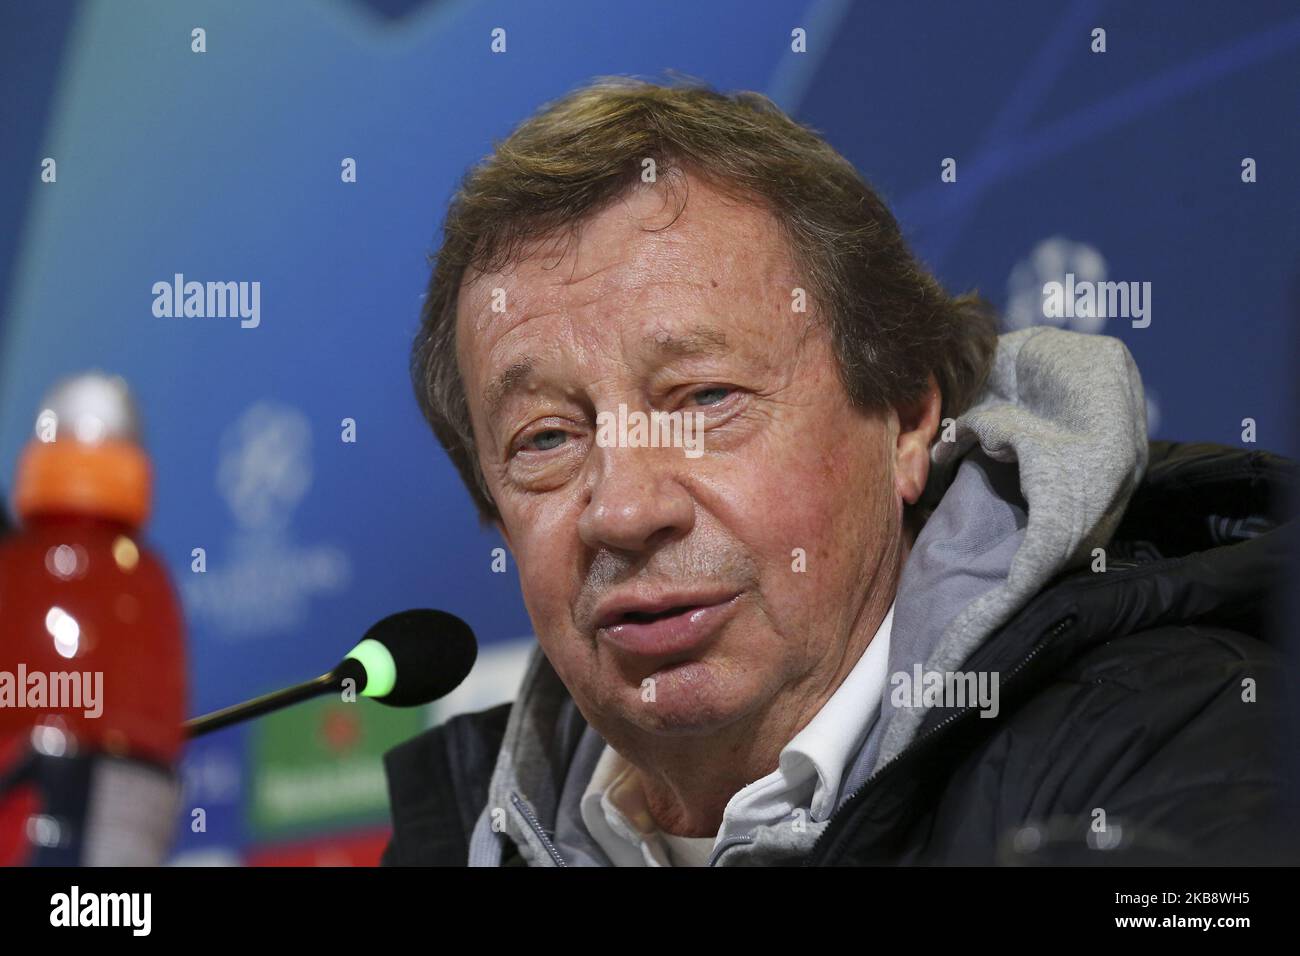 Jurij Pavlovich Sëmin, head coach of FC Lokomotiv Moskva, during the press conference on the eve of the UEFA Champions League match (Group D) between Juventus FC and FC Lokomotiv Moskva at Allianz Stadium on October 21, 2019 in Turin, Italy. (Photo by Massimiliano Ferraro/NurPhoto) Stock Photo